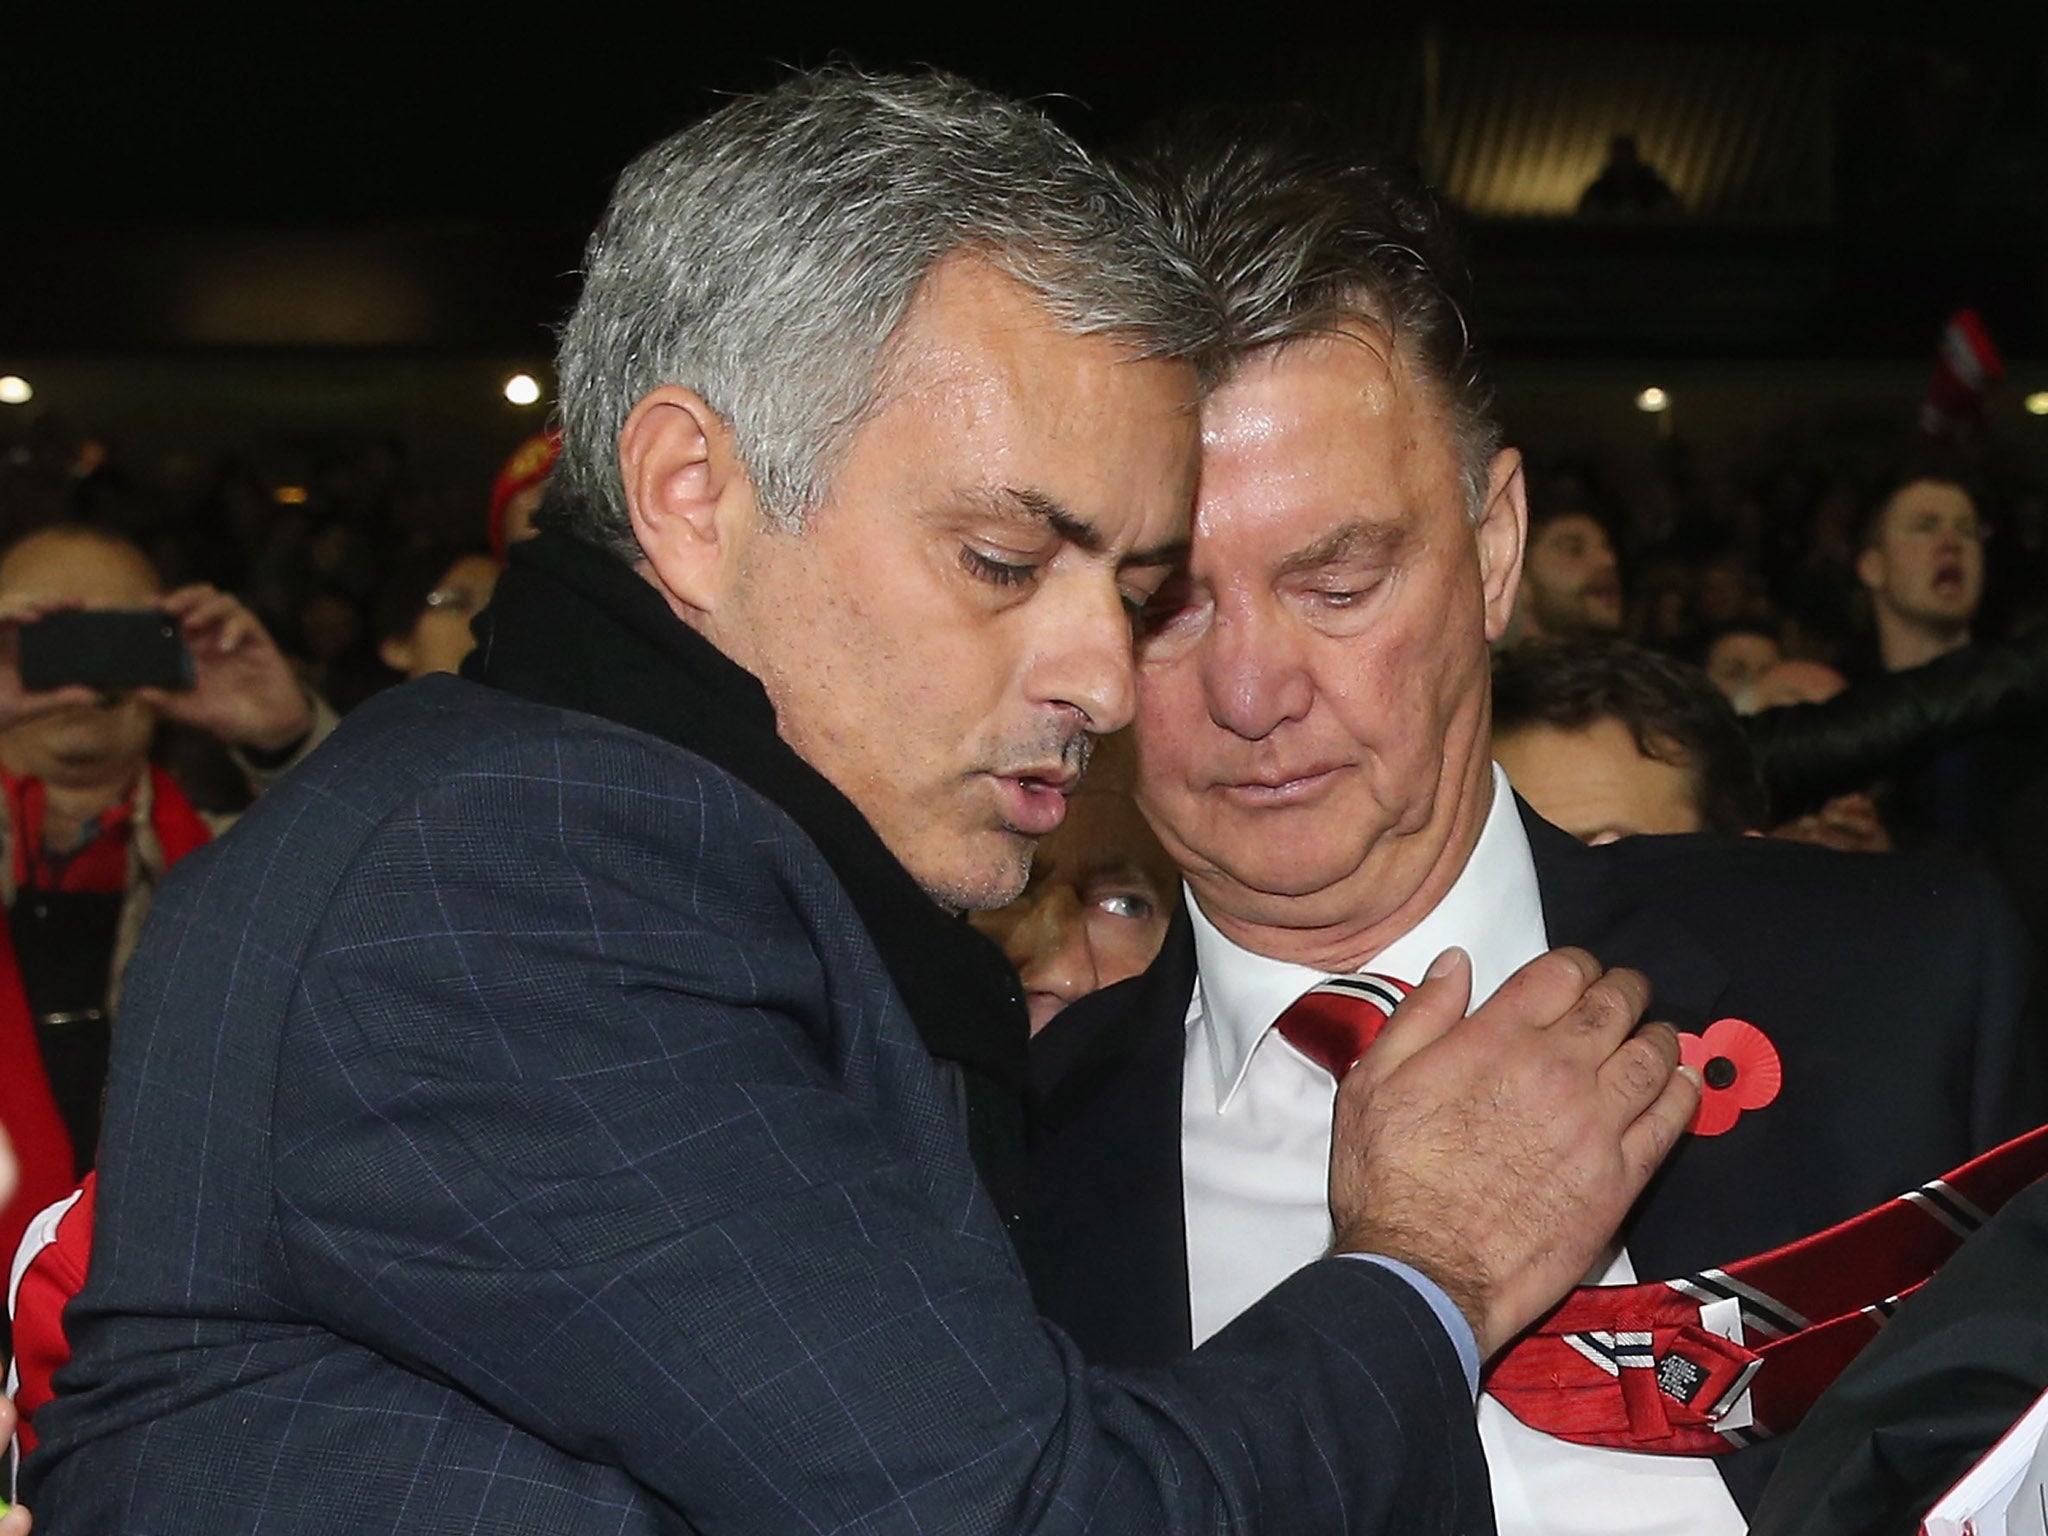 Jose Mourinho wants his players to do the opposite of what Louis van Gaal taught them